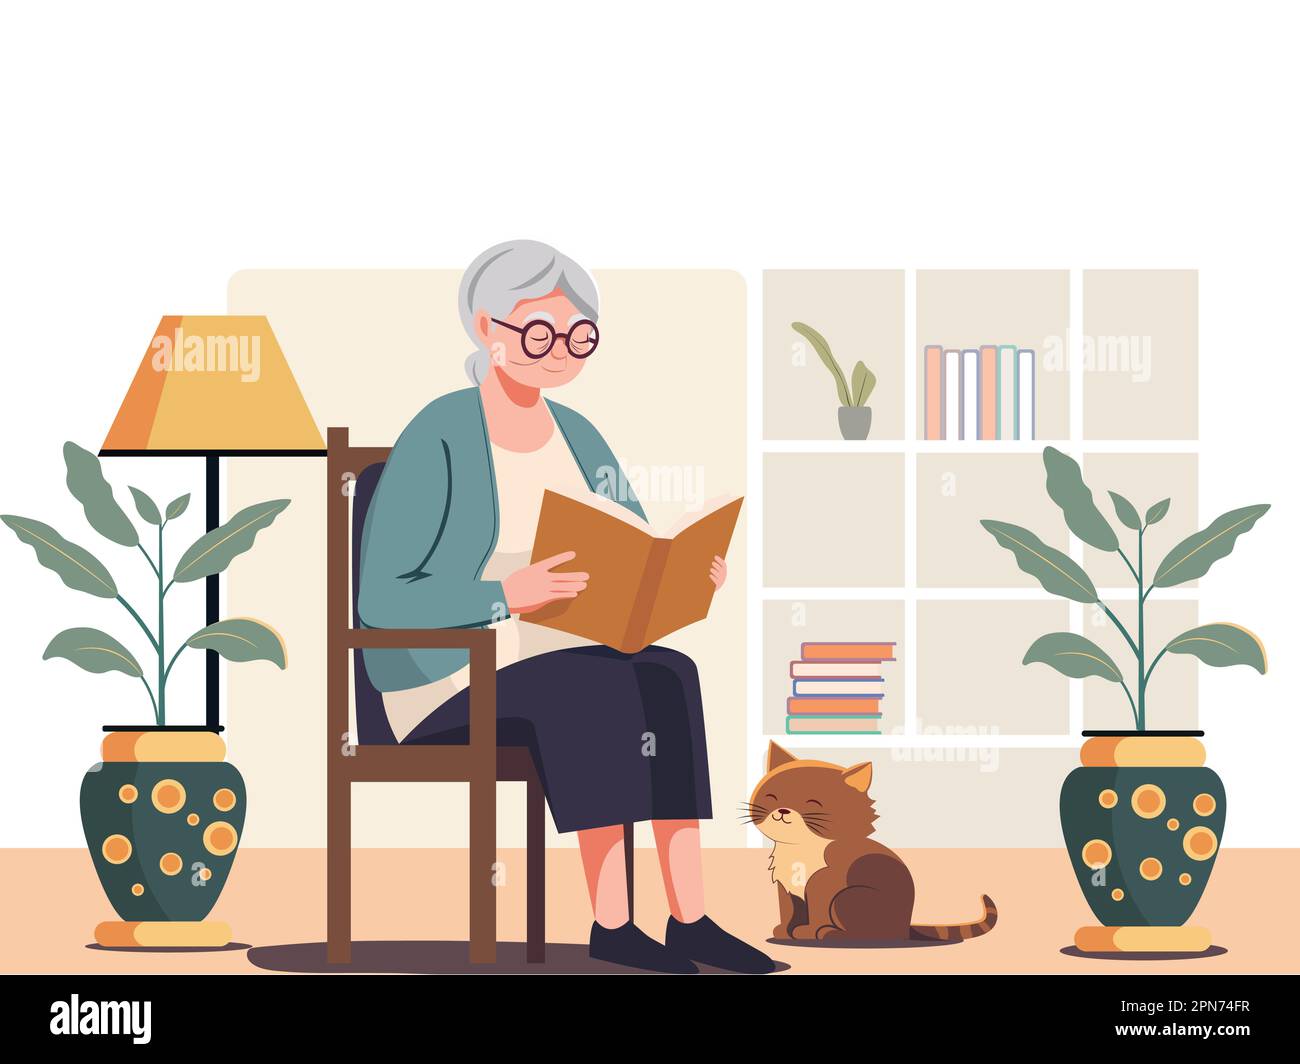 Elderly Woman Character Reading A Book On Chair With Adorable Cat, Plant Vase, Floor Lamp And Shelves Over Background. Stock Vector